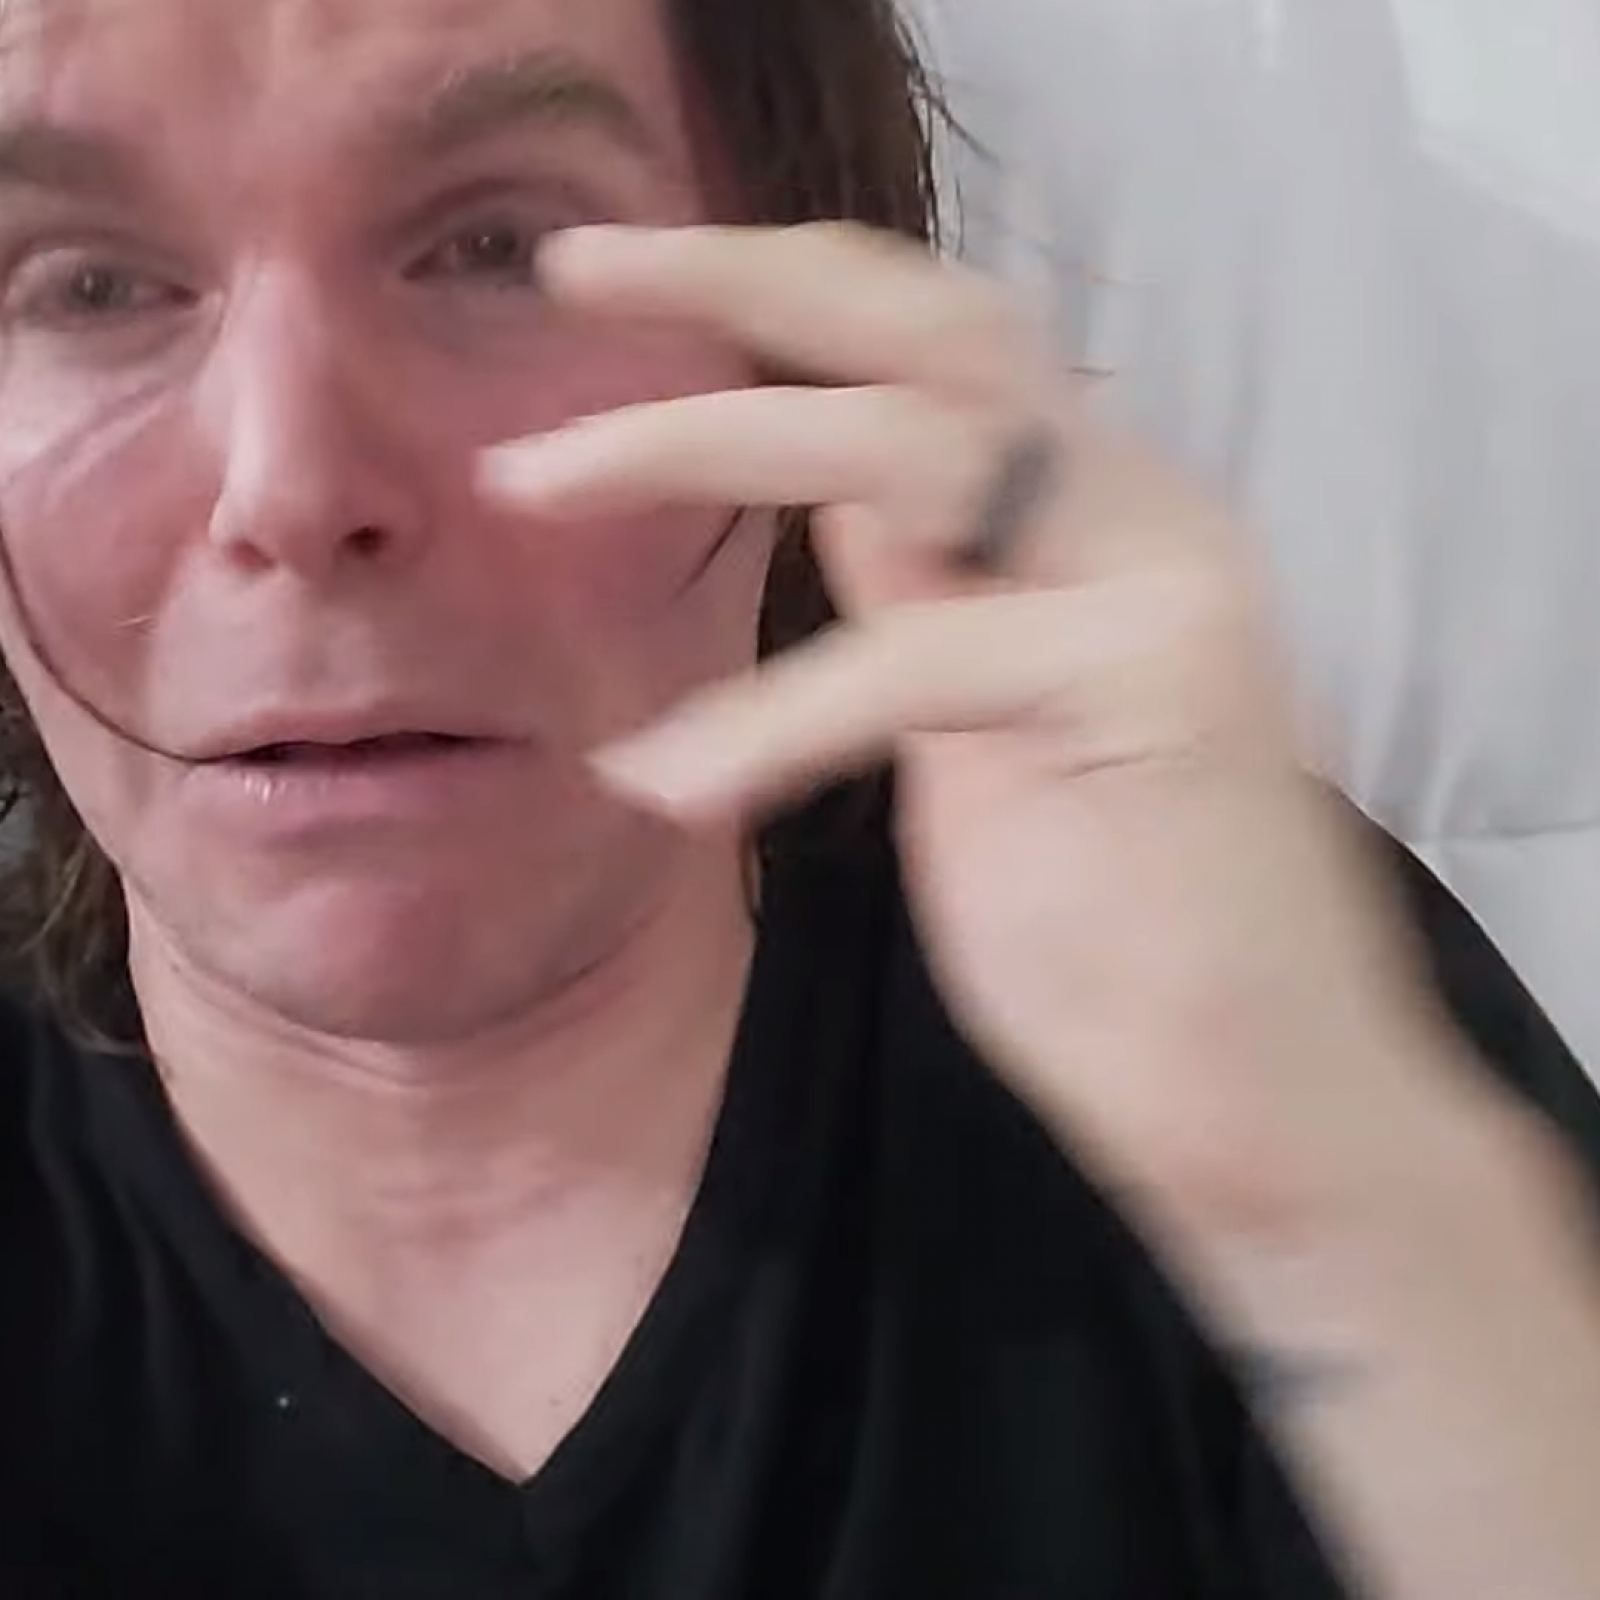 A does kid have onision Onision (Kombucha